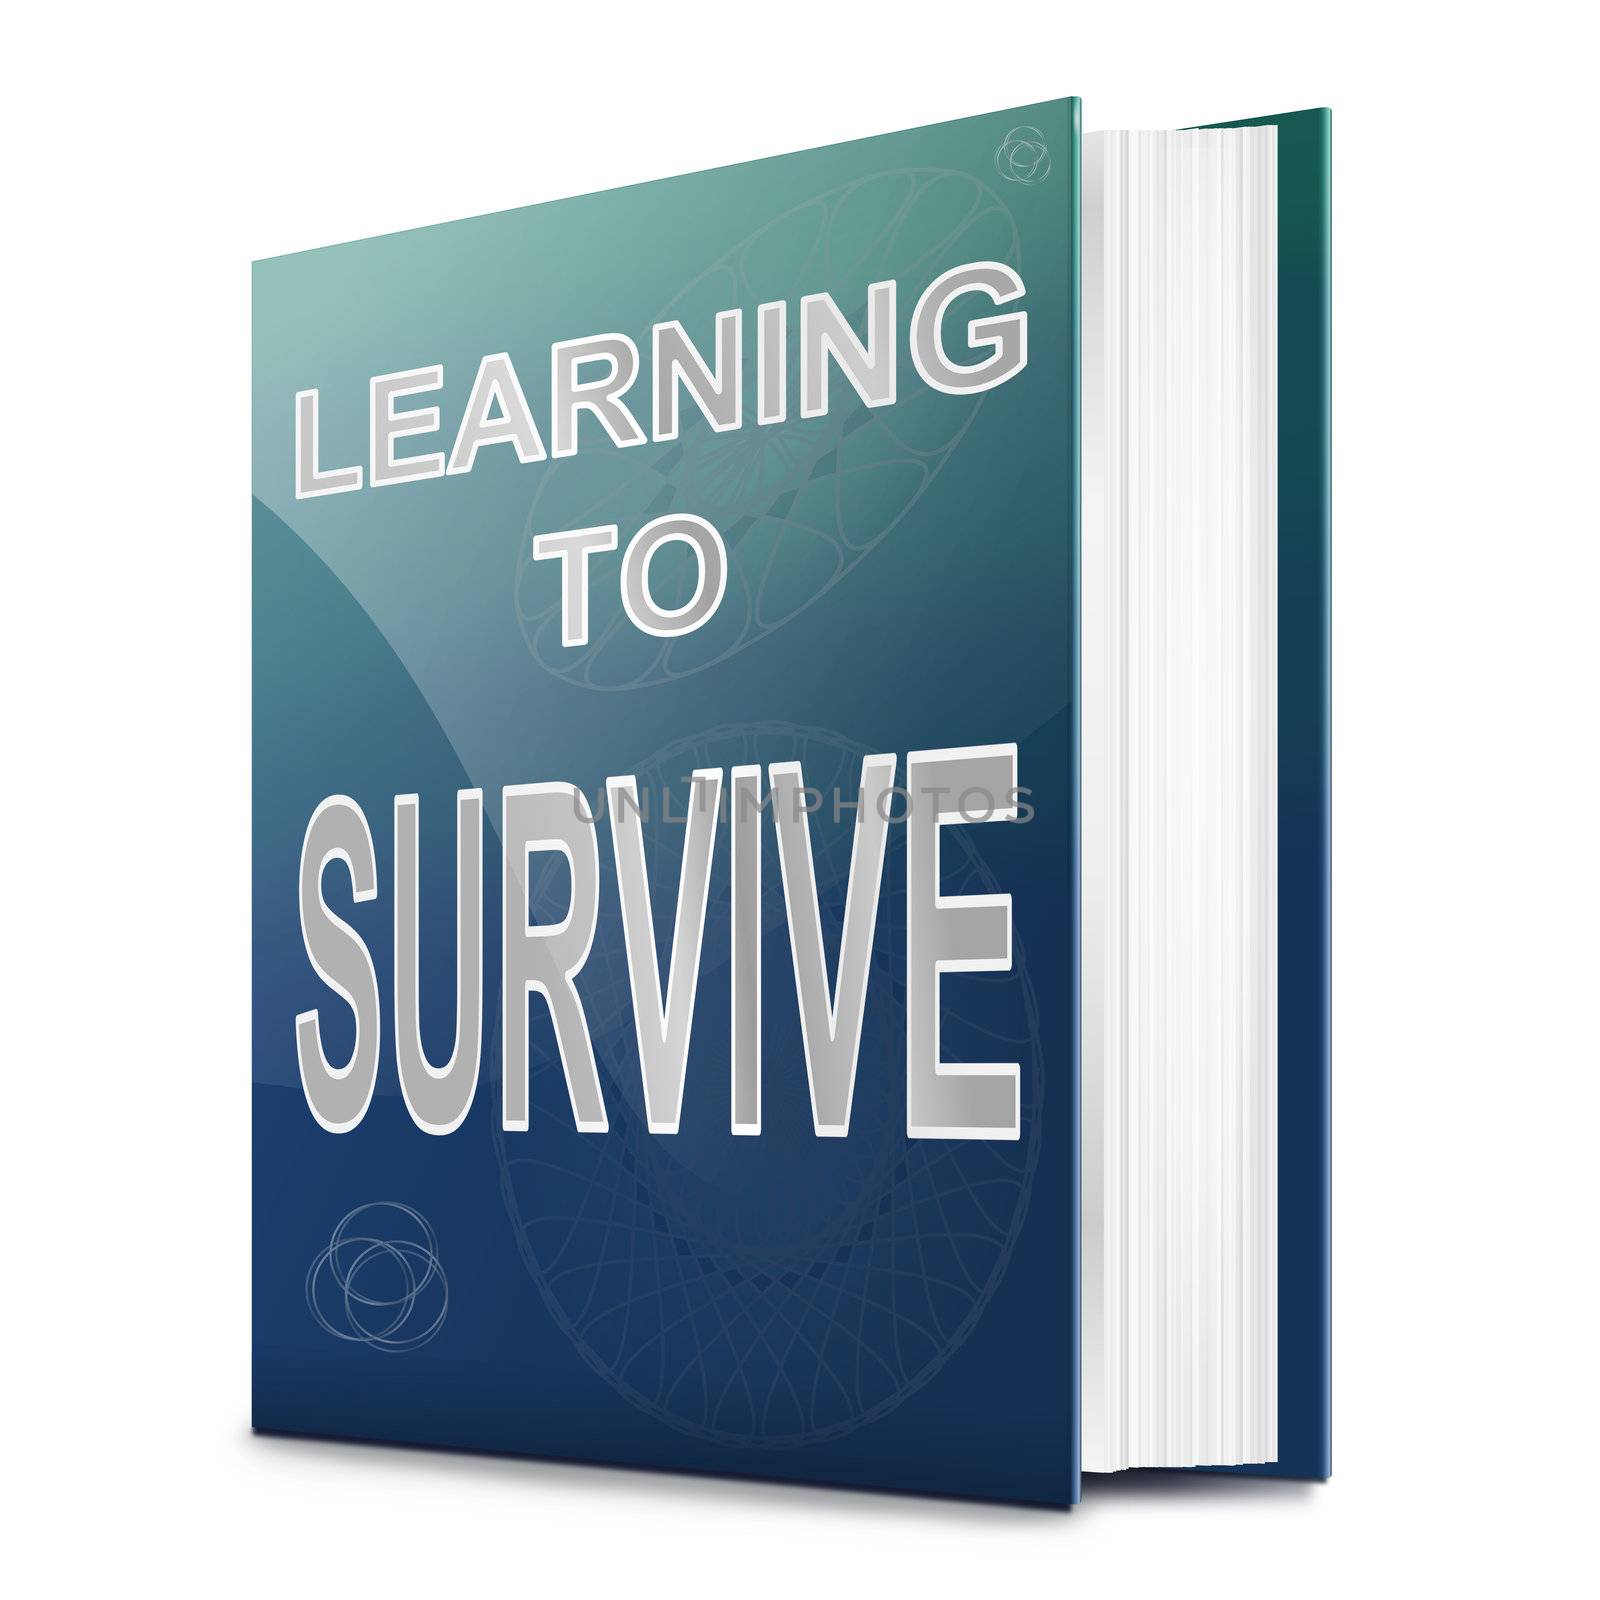 Learn to survive concept. by 72soul